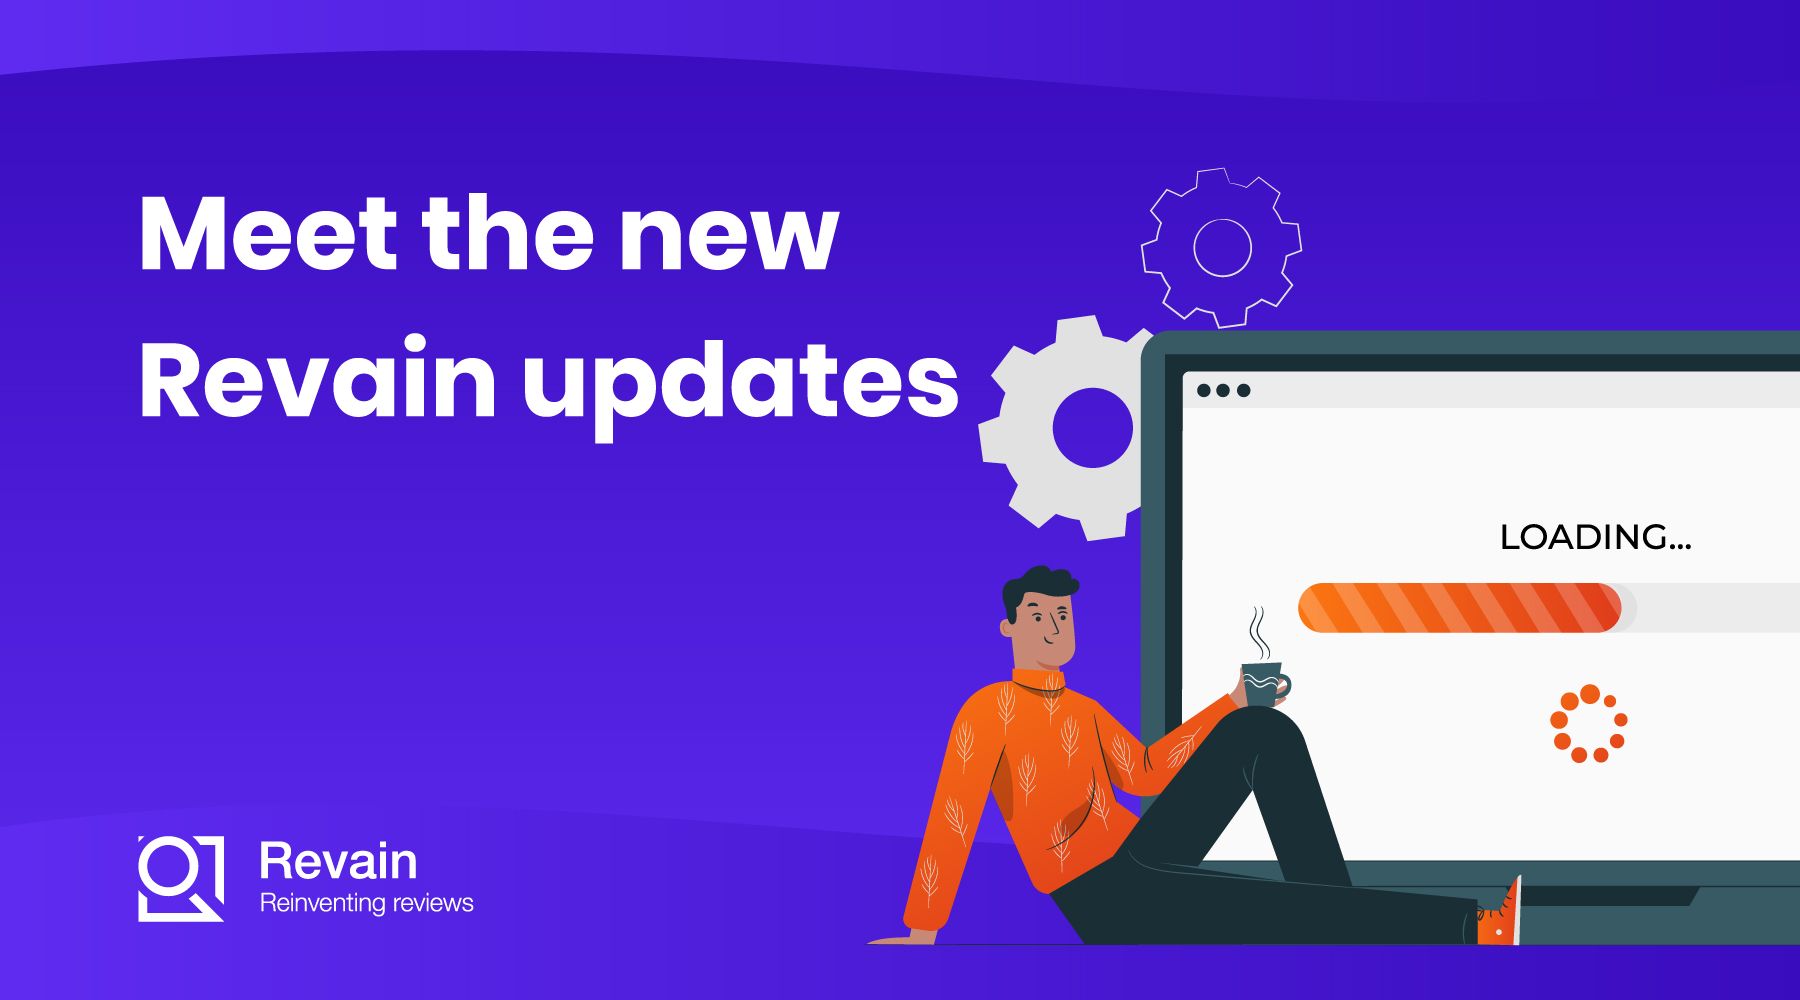 Article Dear Revainers, welcome the new Revain updates!